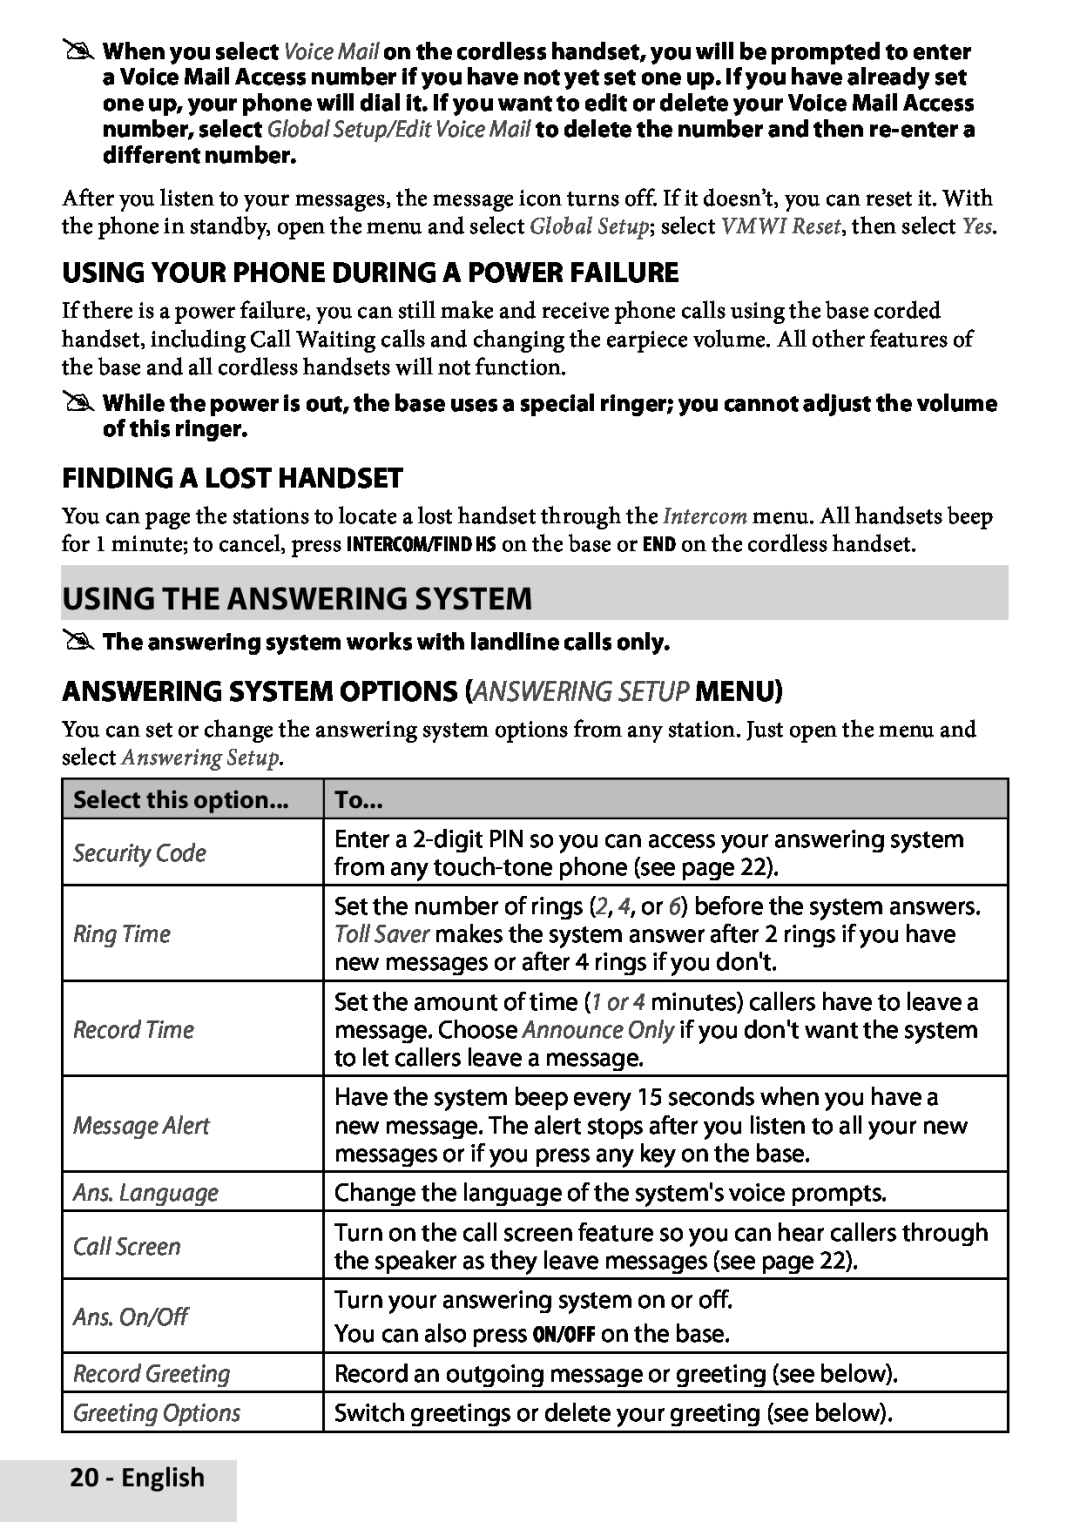 Uniden D1789-12 manual Using the Answering System, Using Your Phone During a Power Failure, Finding a Lost Handset, English 